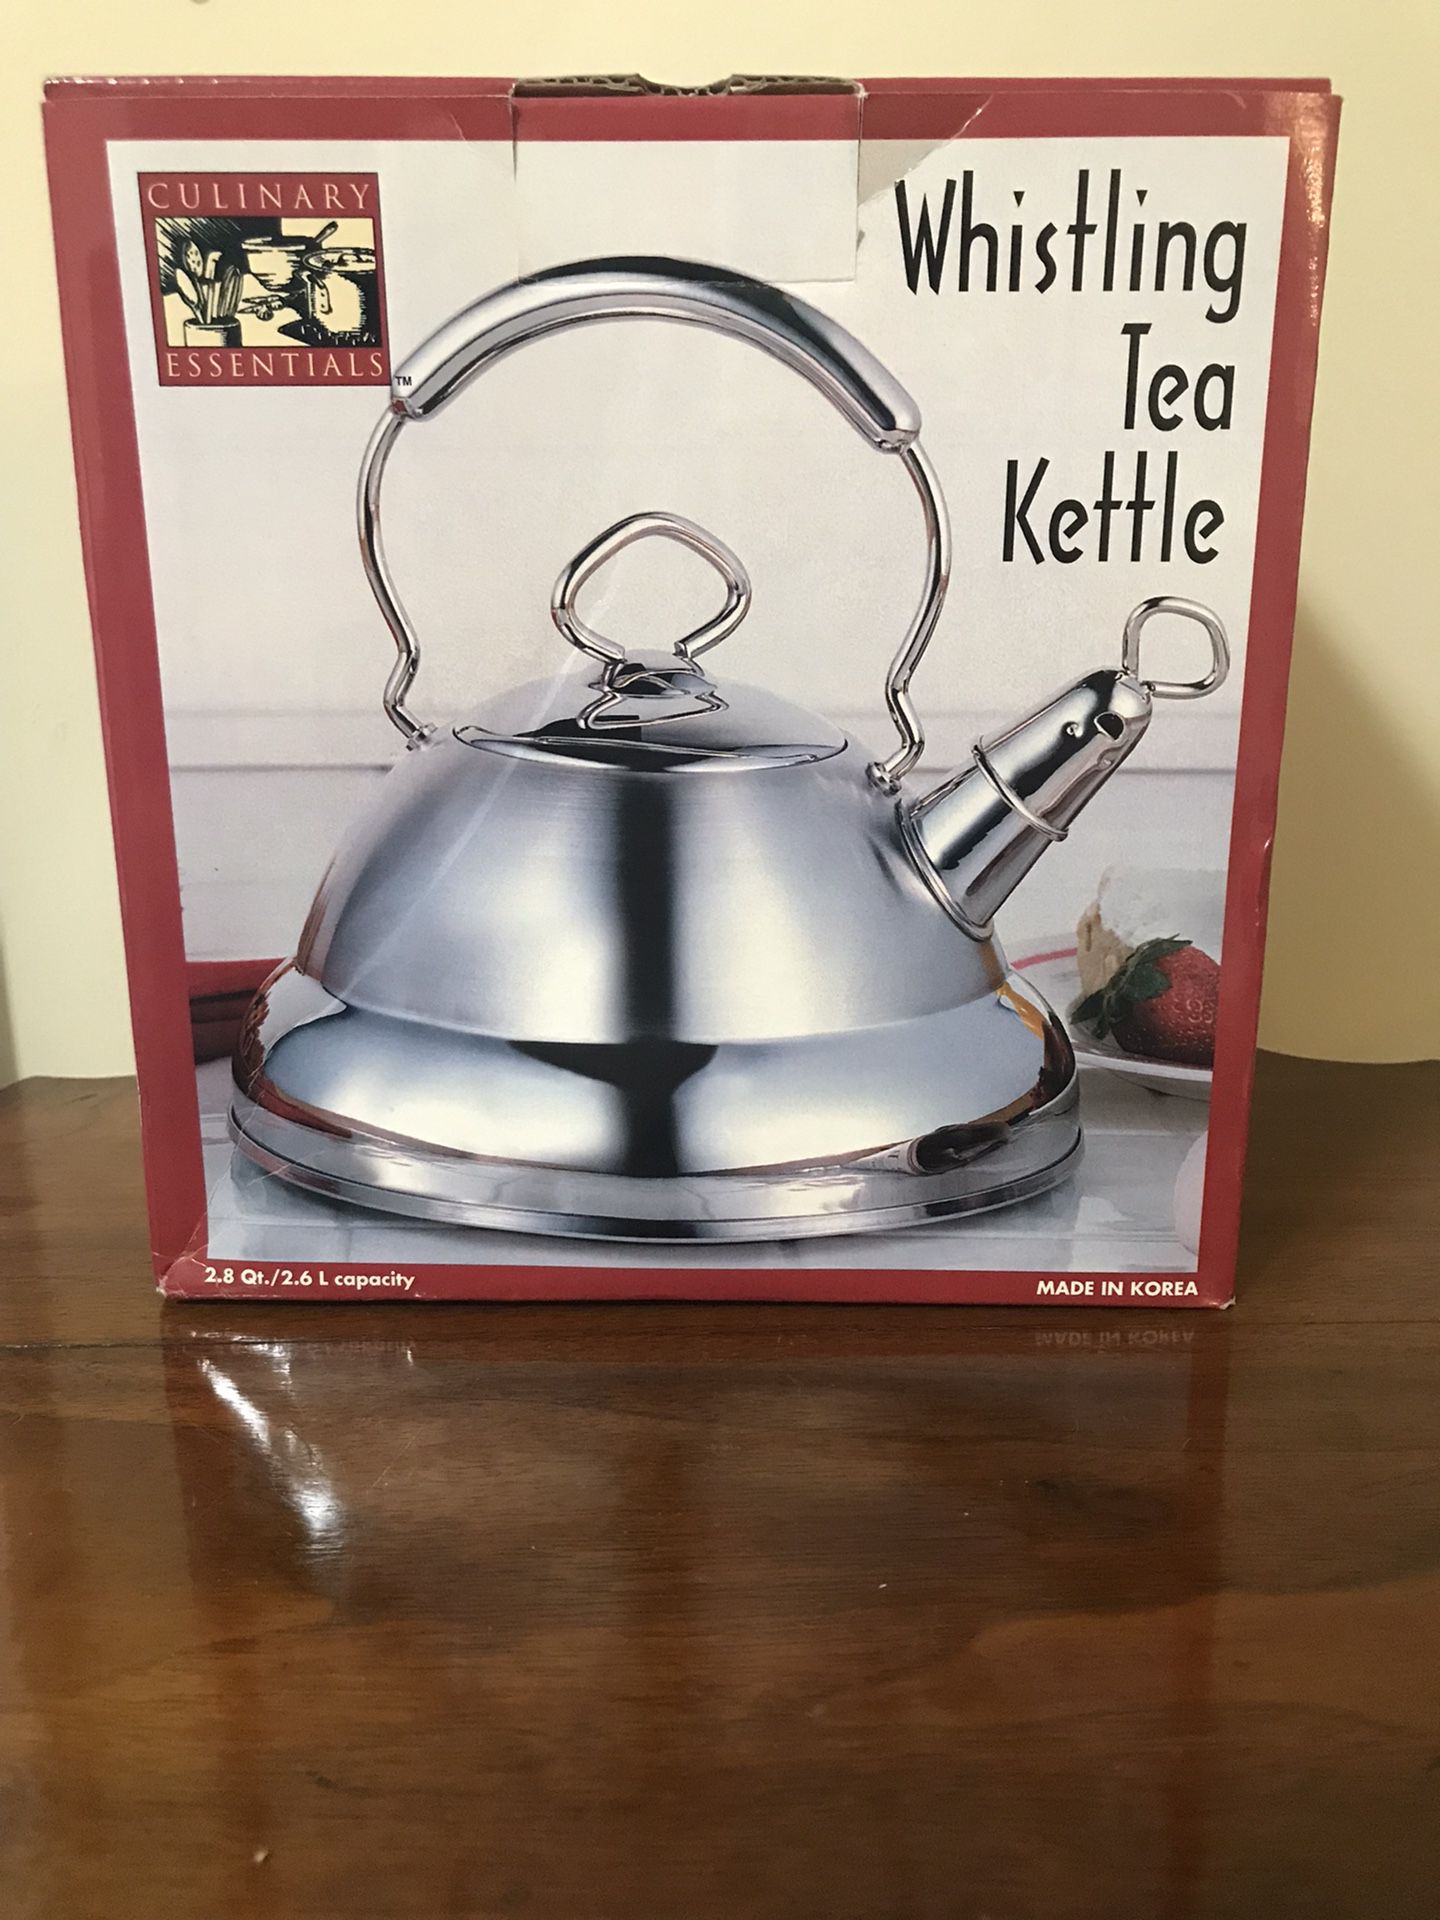  Culinary essentials whistling tea kettle